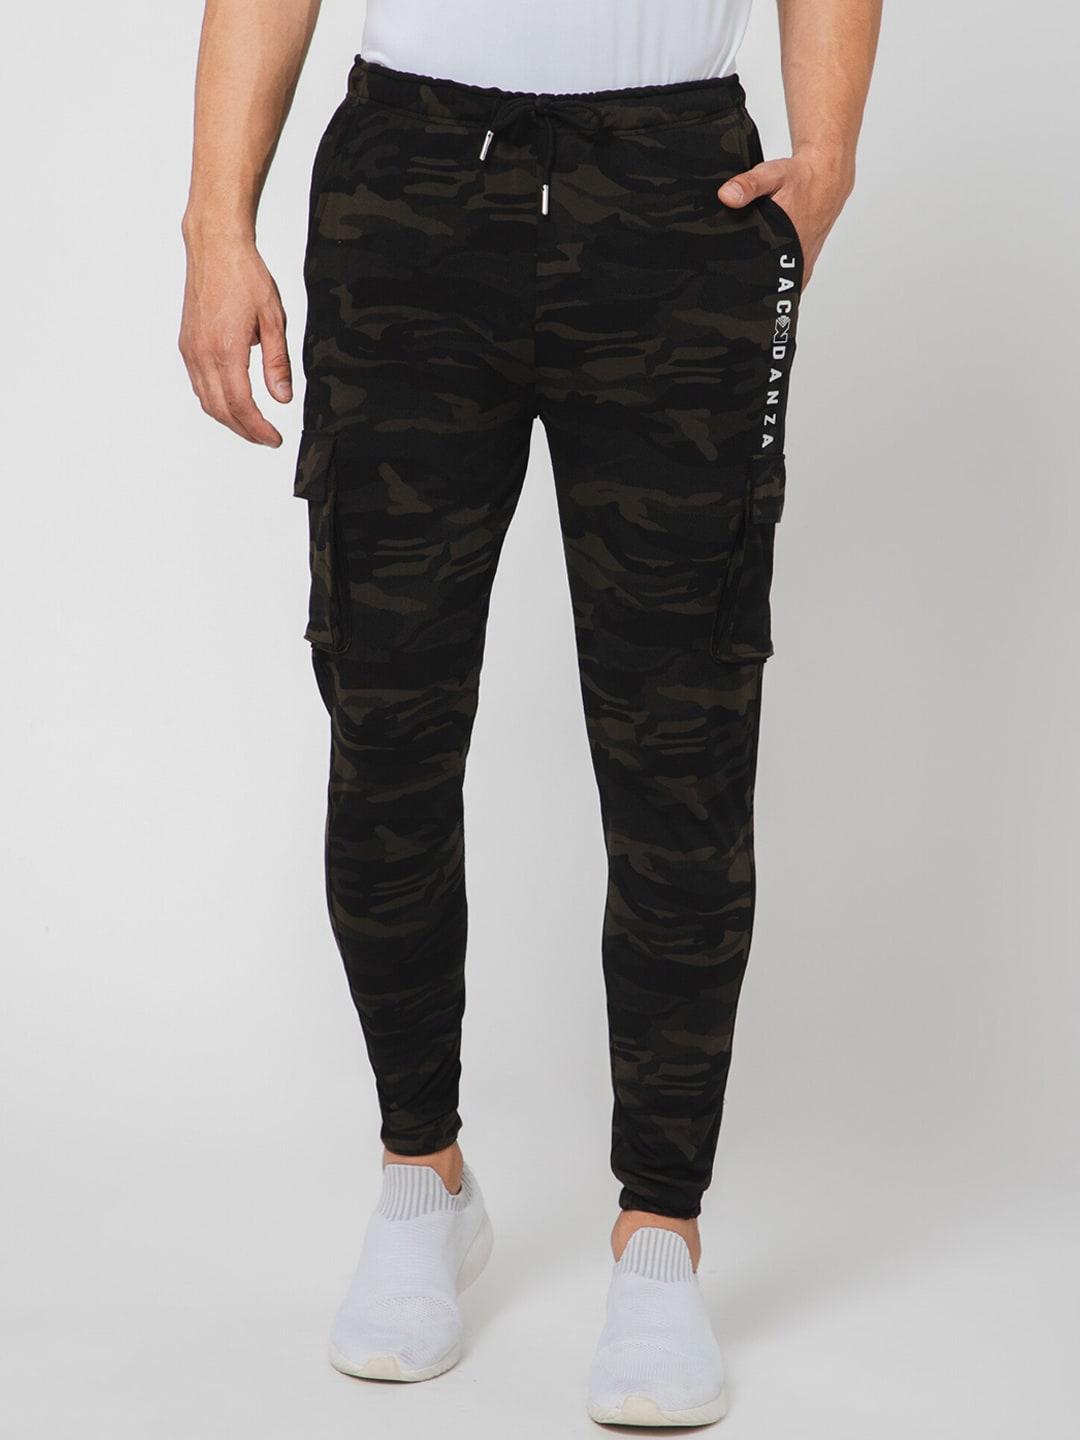 jackdanza-men-camouflage-printed-joggers